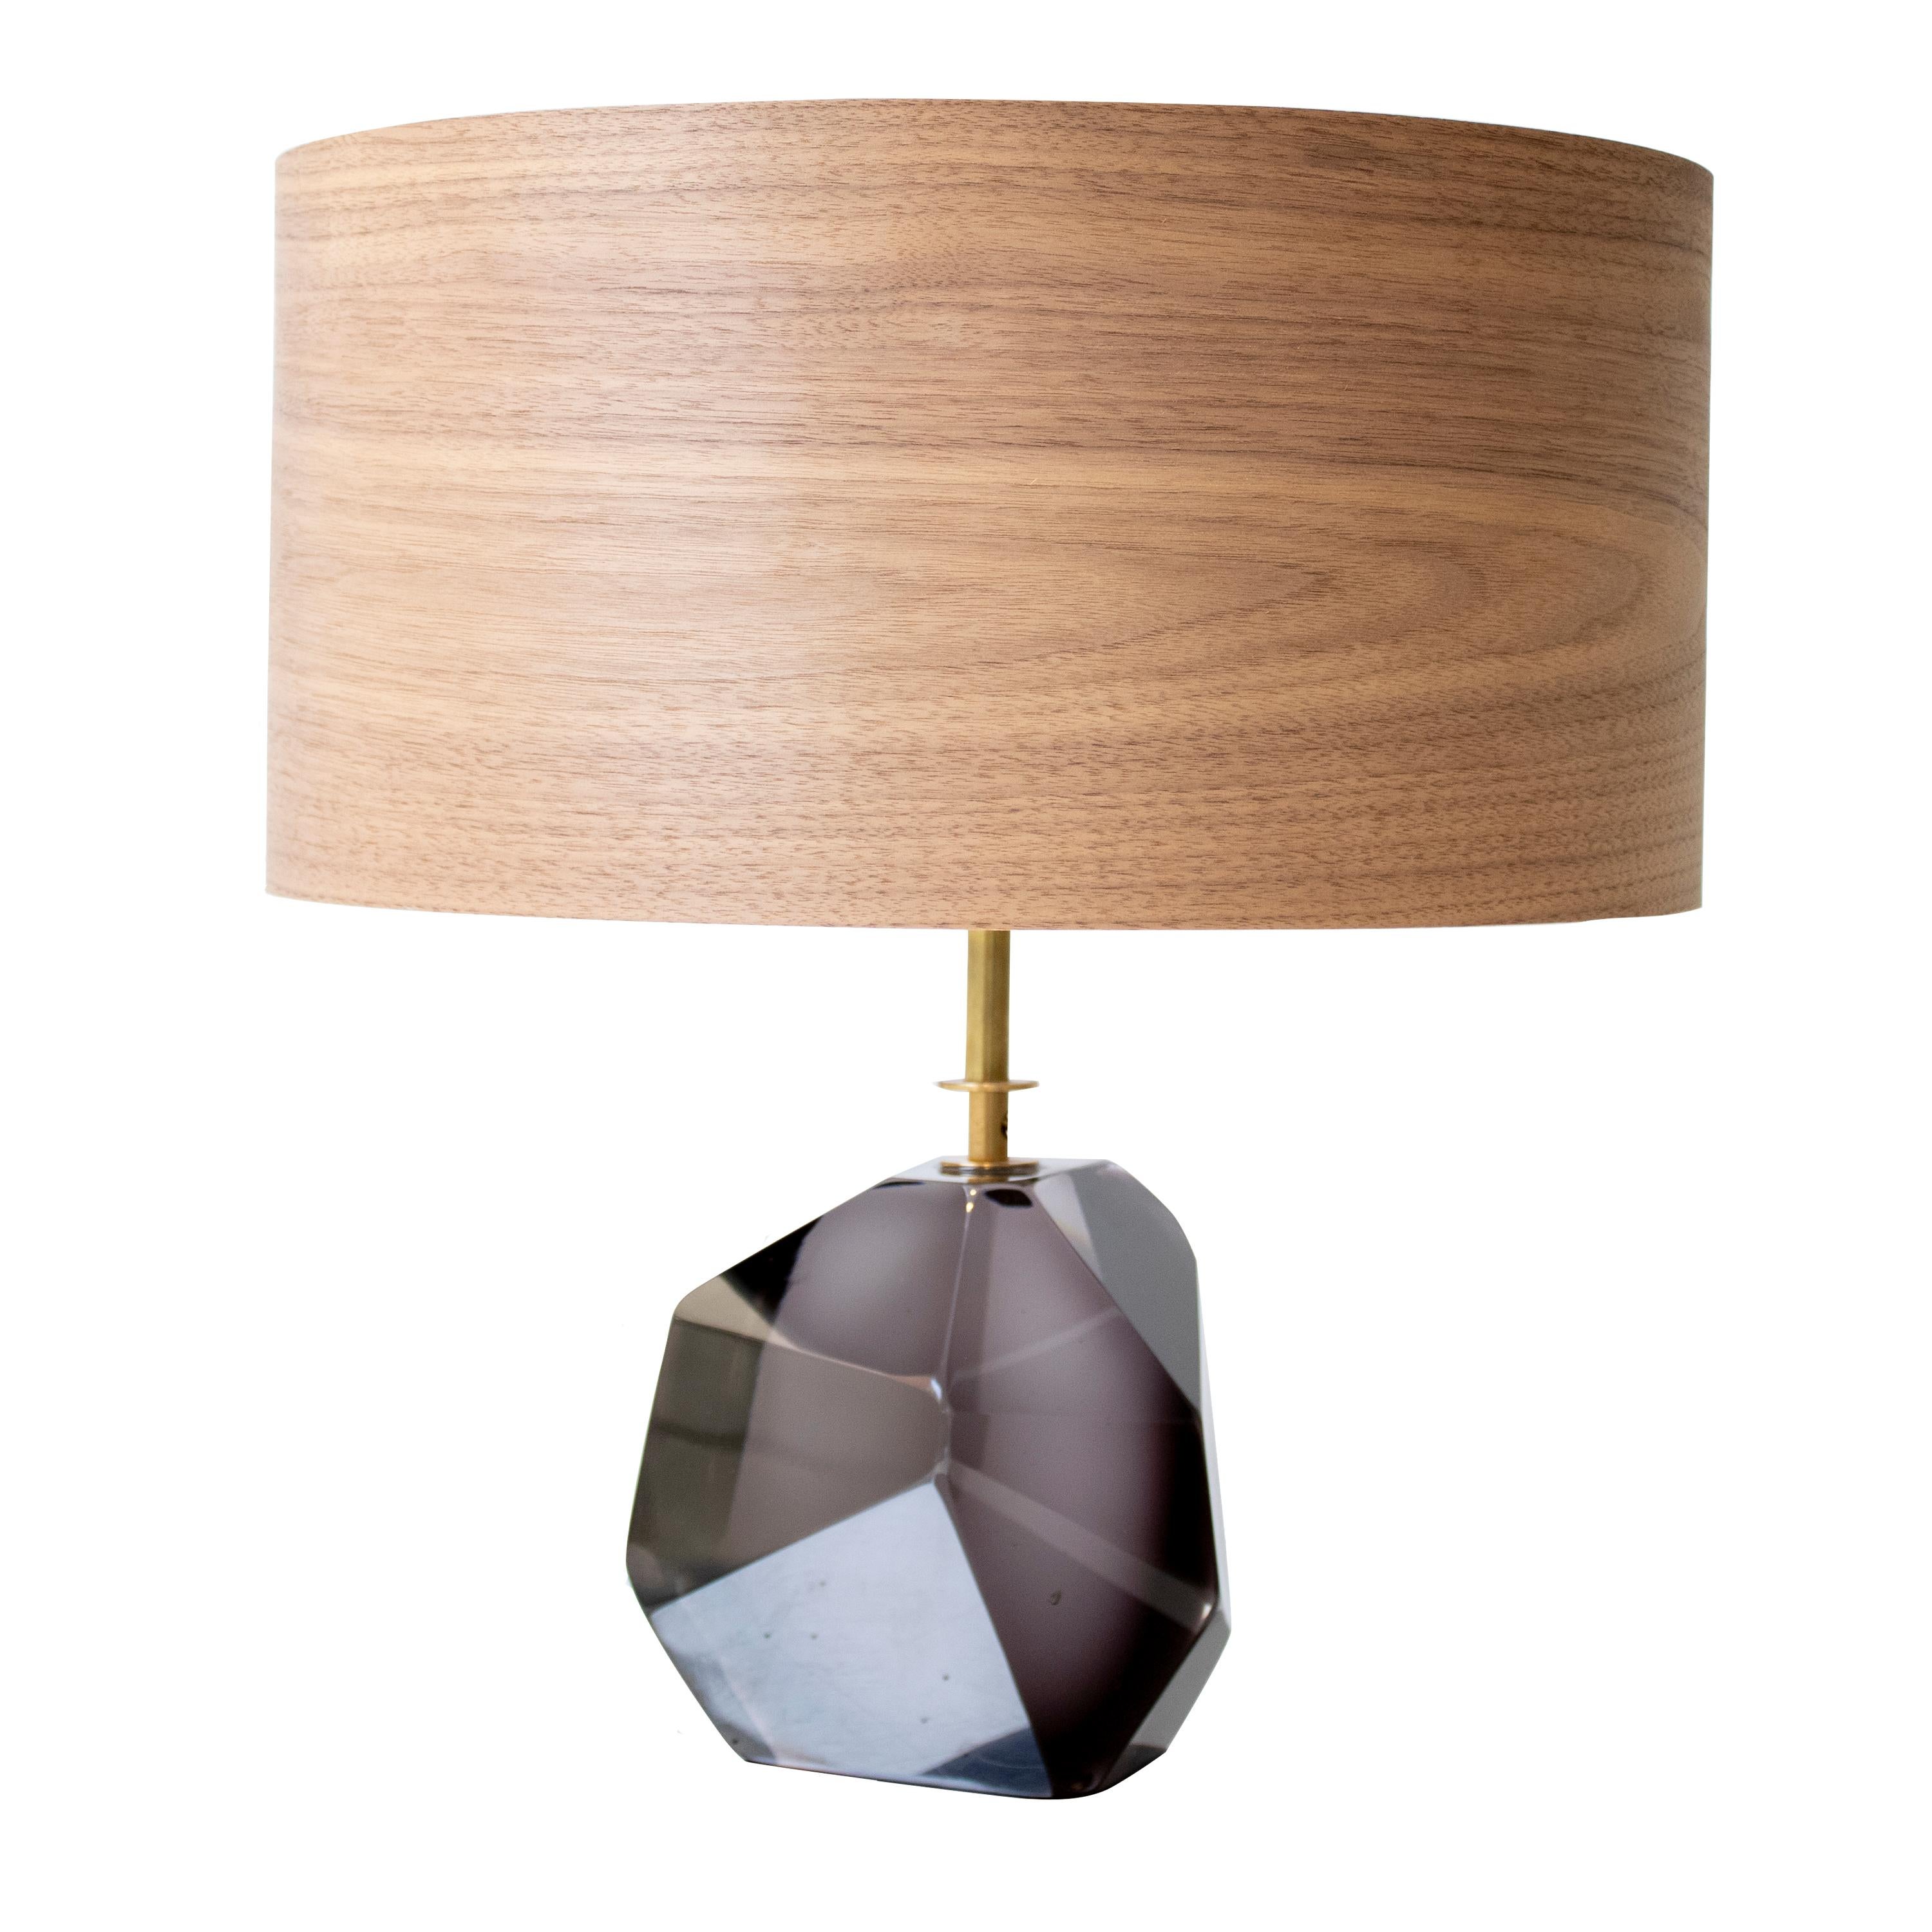 Table lamp made of Murano faceted glass in translucent dark grey and brass stem made by hand. Walnut lamp shade.